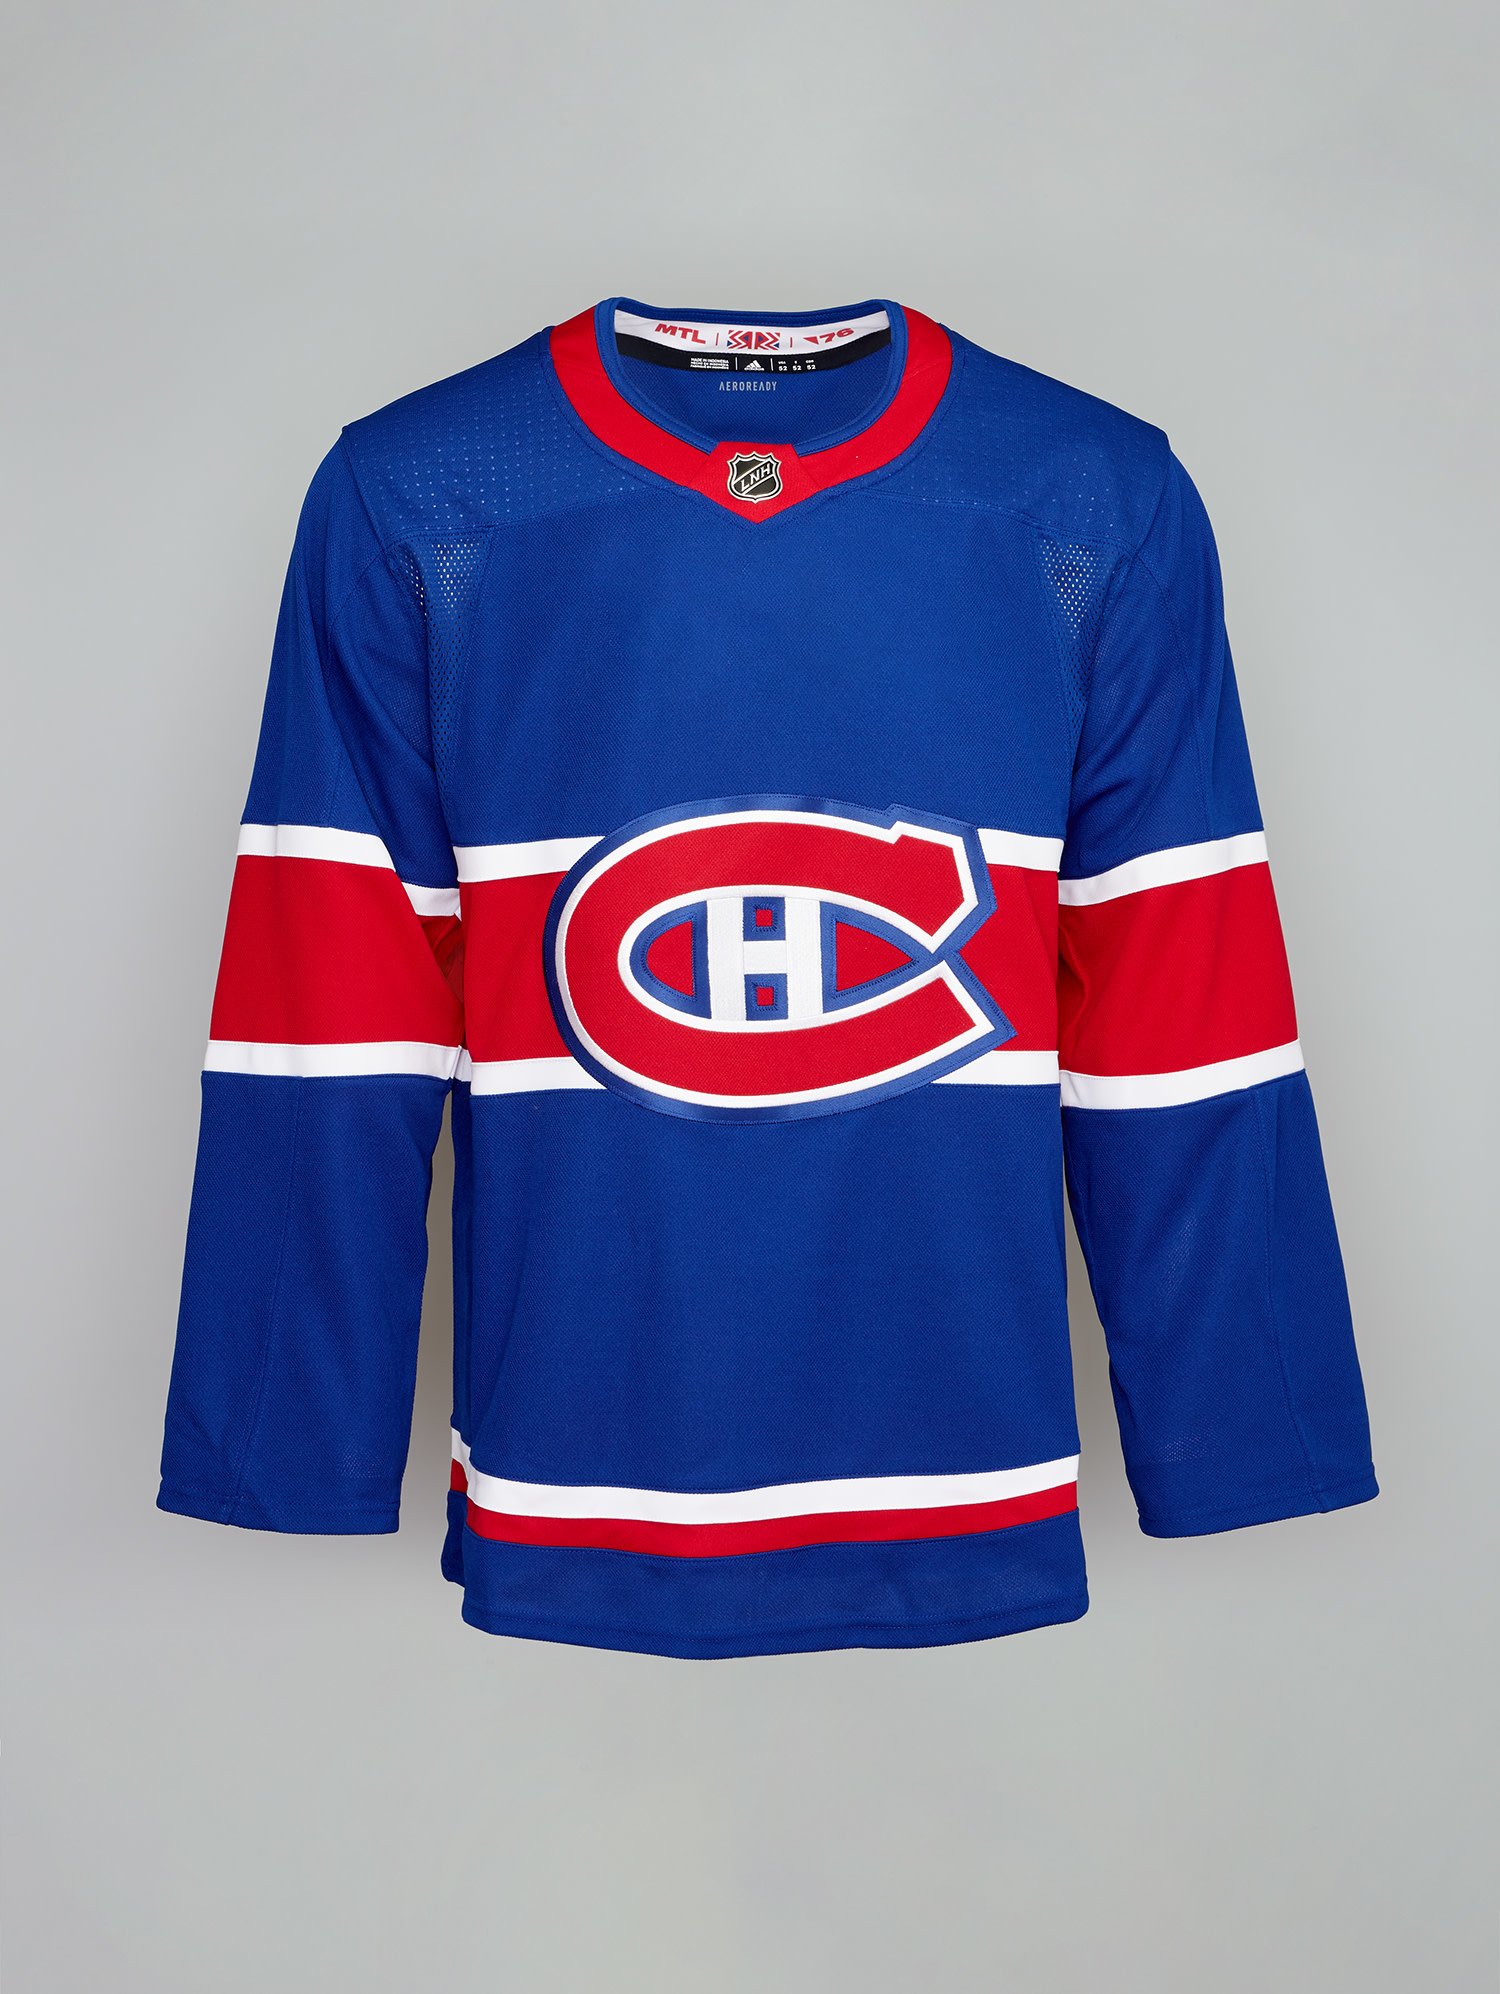 Lucas Daitchman on X: Here's what I'd like to see the Habs do with an Expos-themed  Reverse Retro jersey next season. It's an unmistakable tribute, but one  that doesn't deviate too far